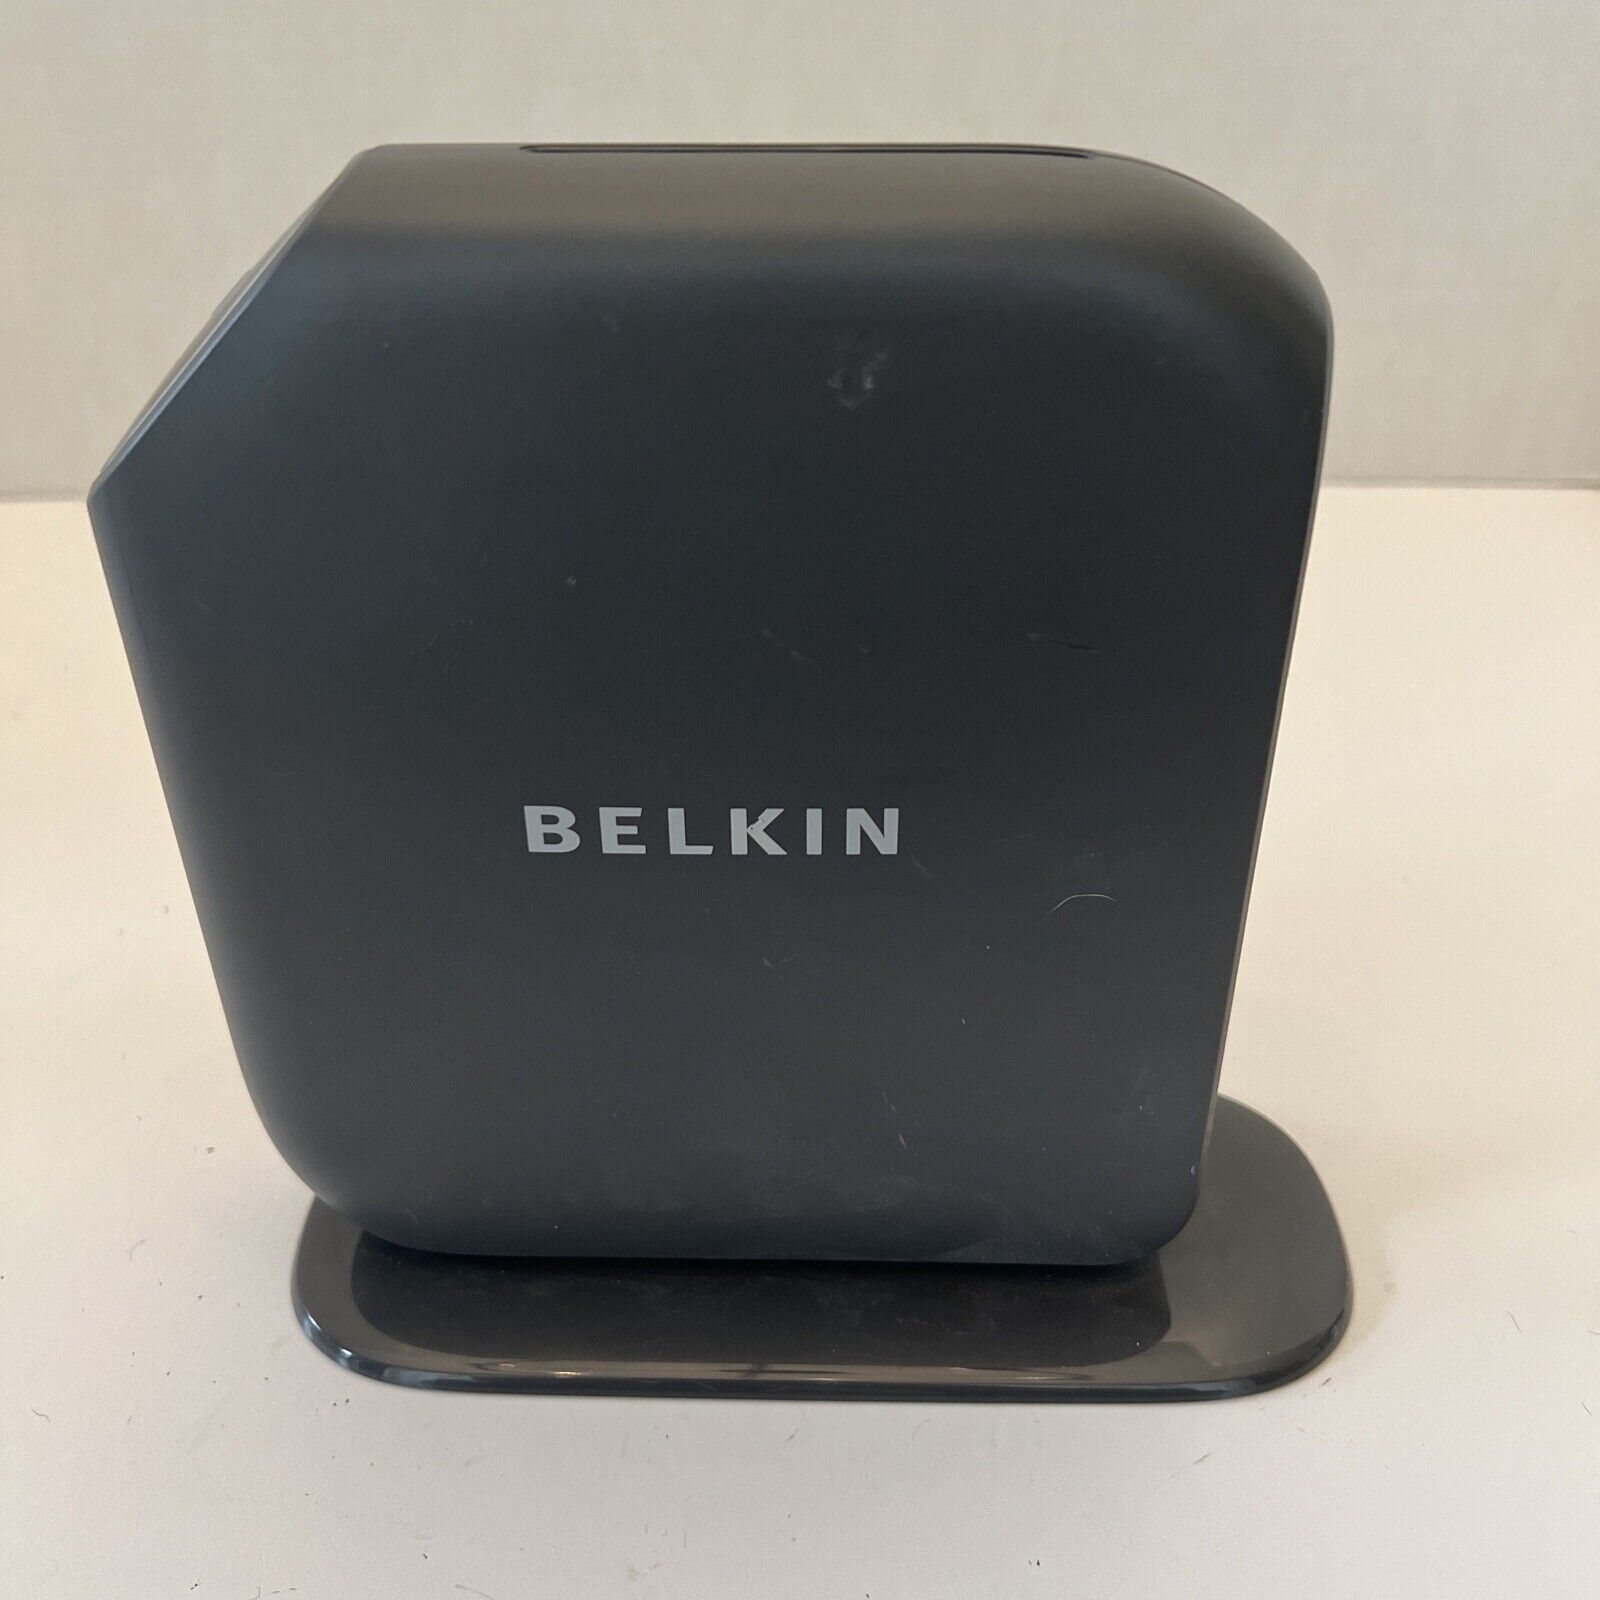 Belkin F7D8302 Play N600 300 Mbps 1-Port 10/100 Wireless N Router No Cables